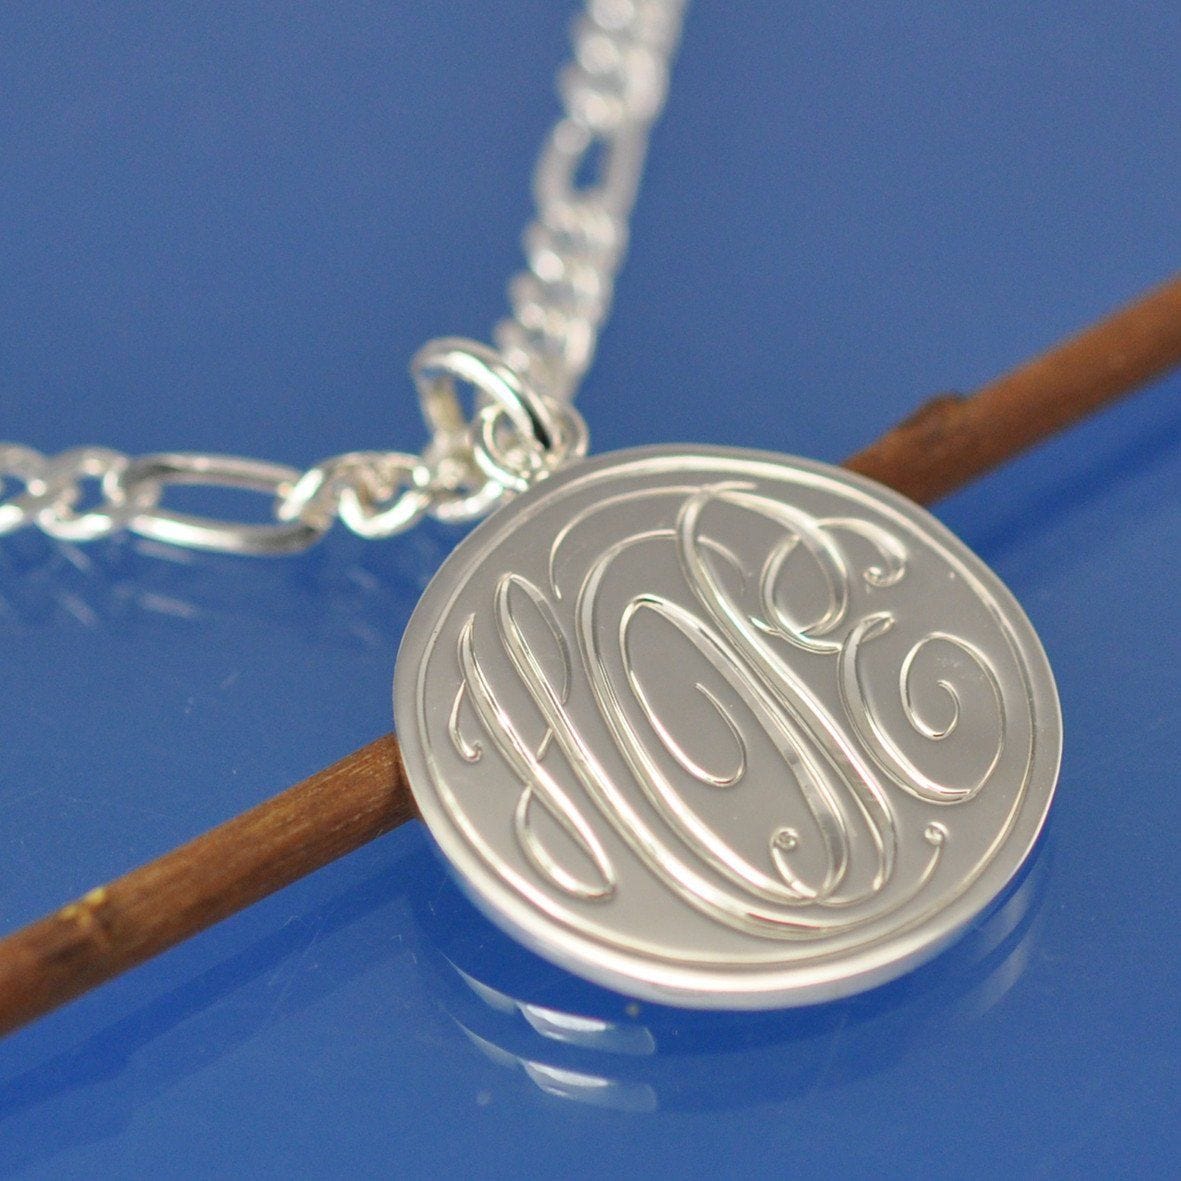 Personalised Cryptic Monogram Pendant Pendant by Chris Parry Jewellery